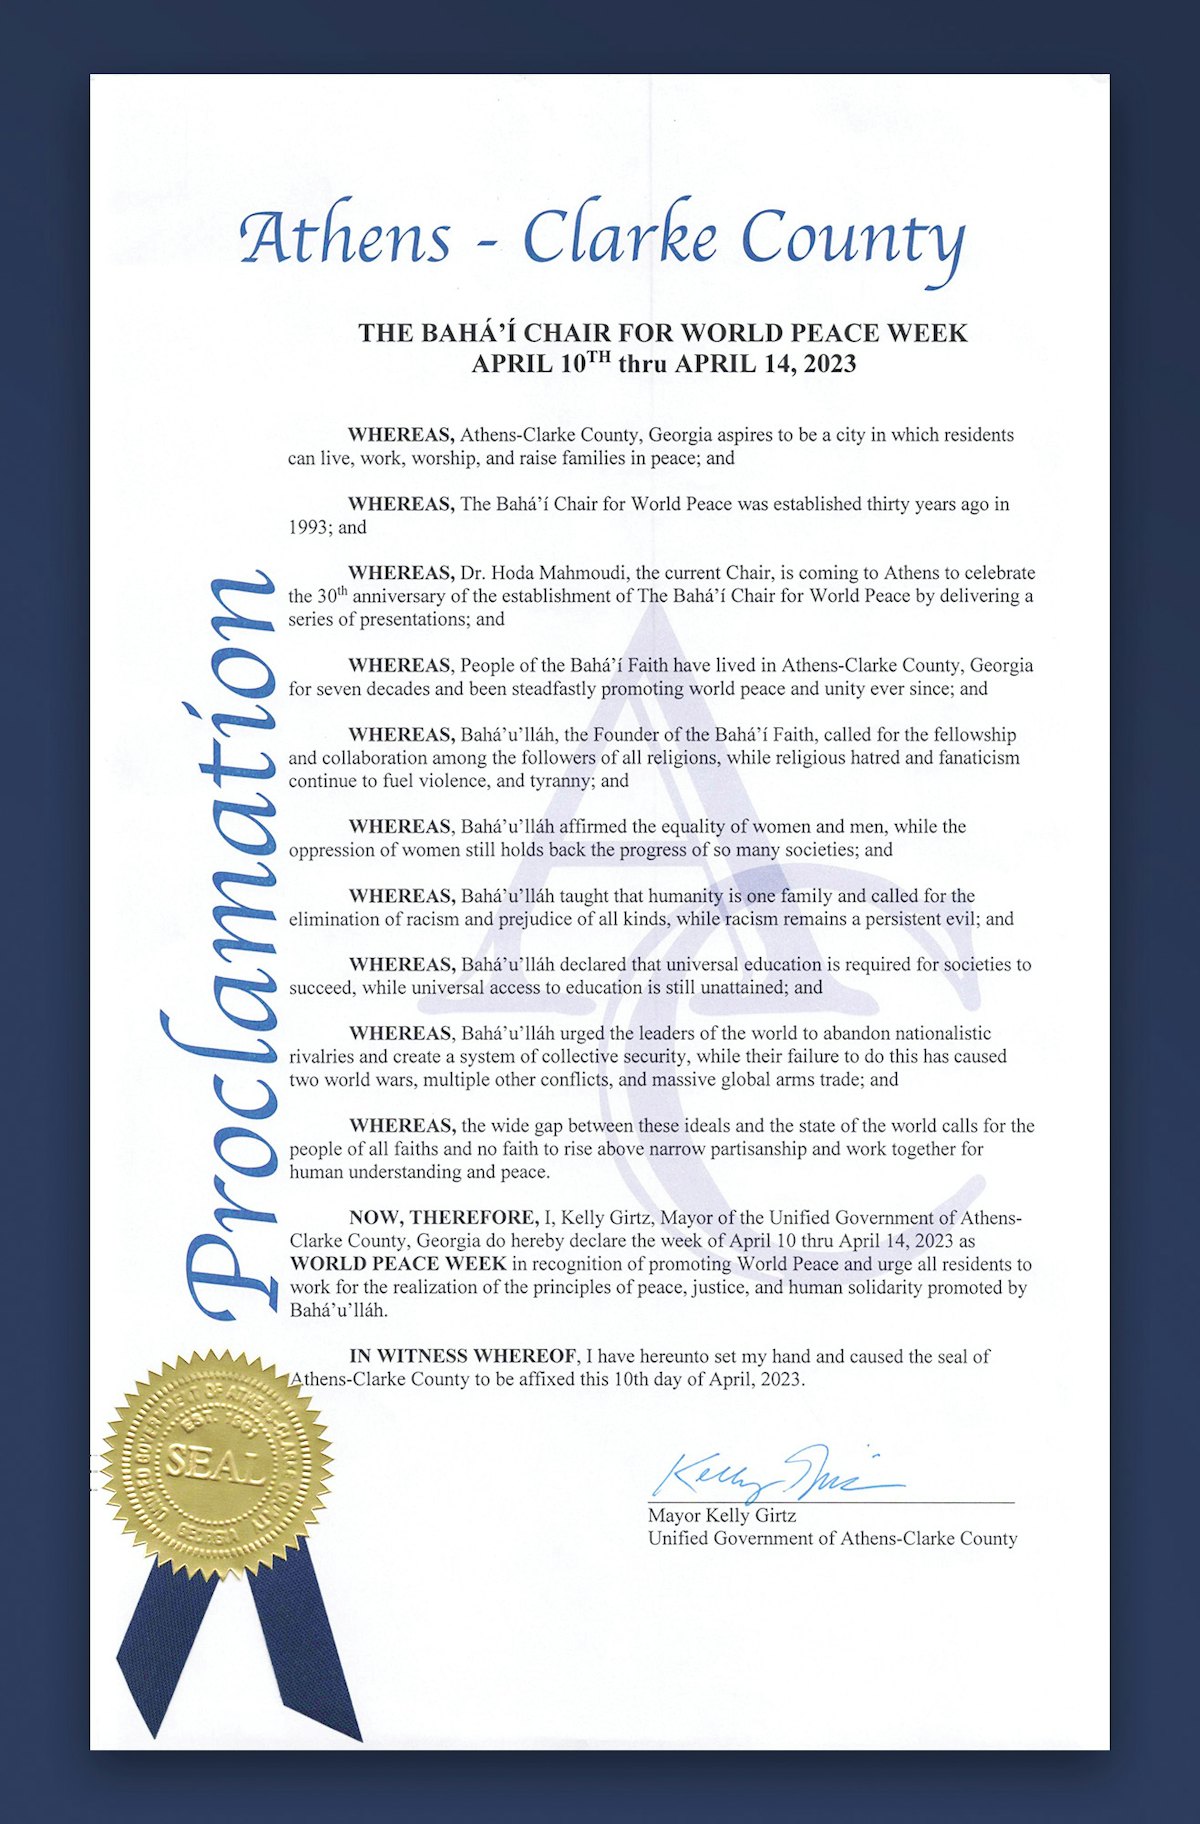 The proclamation, signed by Mayor Kelly Girtz of Athens-Clarke County, Georgia, has declared 10 to 14 April 2023 as “World Peace Week”, in honor of the 30th anniversary of the establishment of the Bahá’í Chair for World Peace at the University of Maryland.